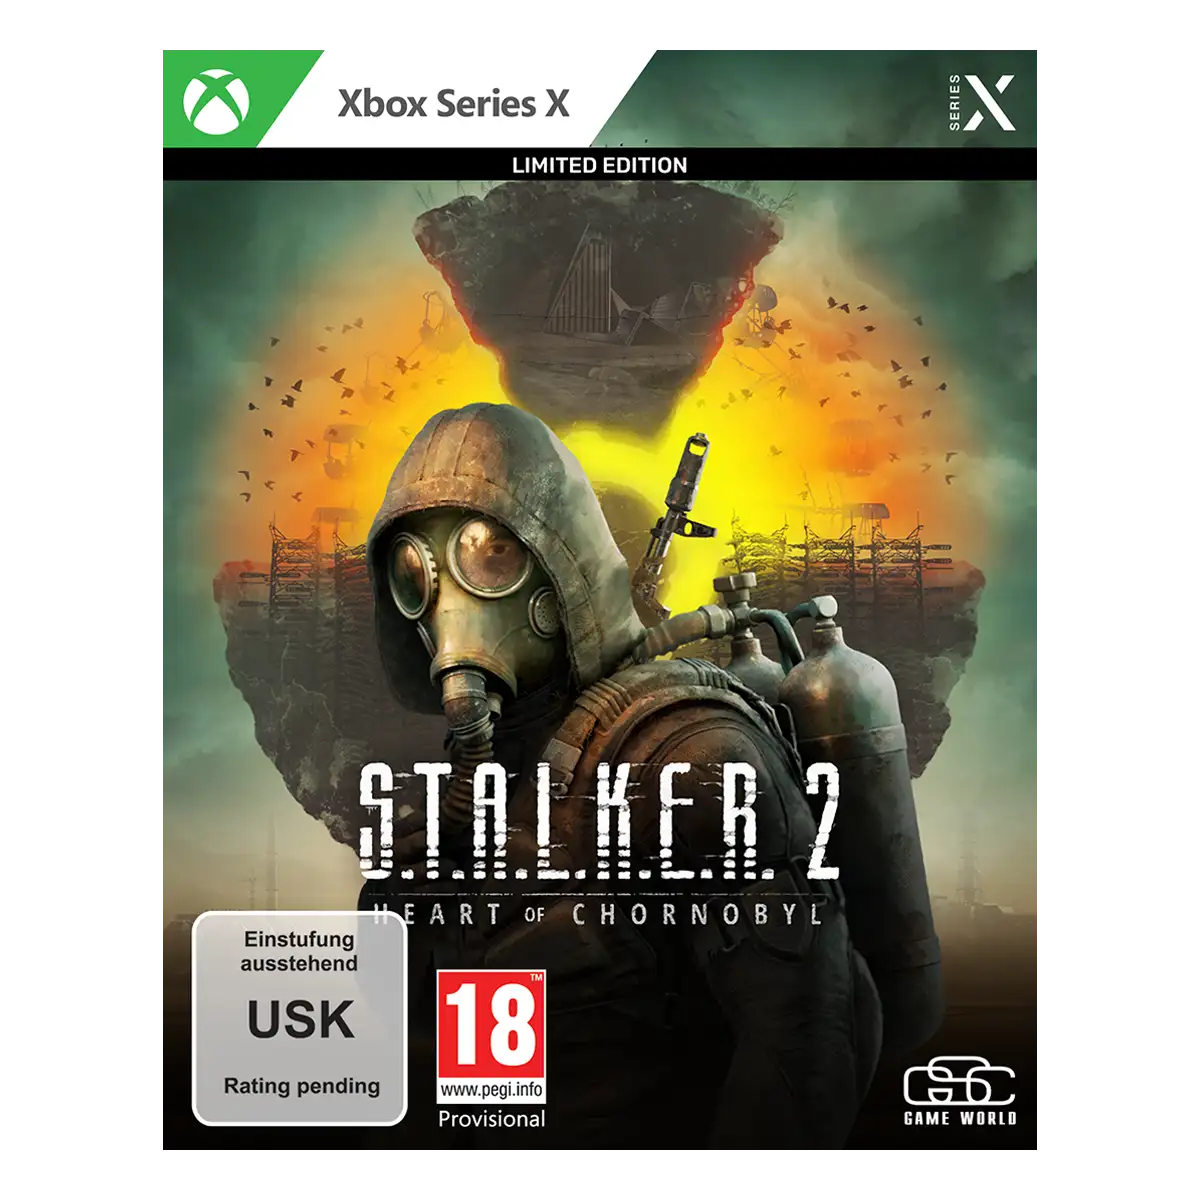 S.T.A.L.K.E.R. 2: Heart of Chornobyl Limited Edition (XSRX) Thumbnail 1